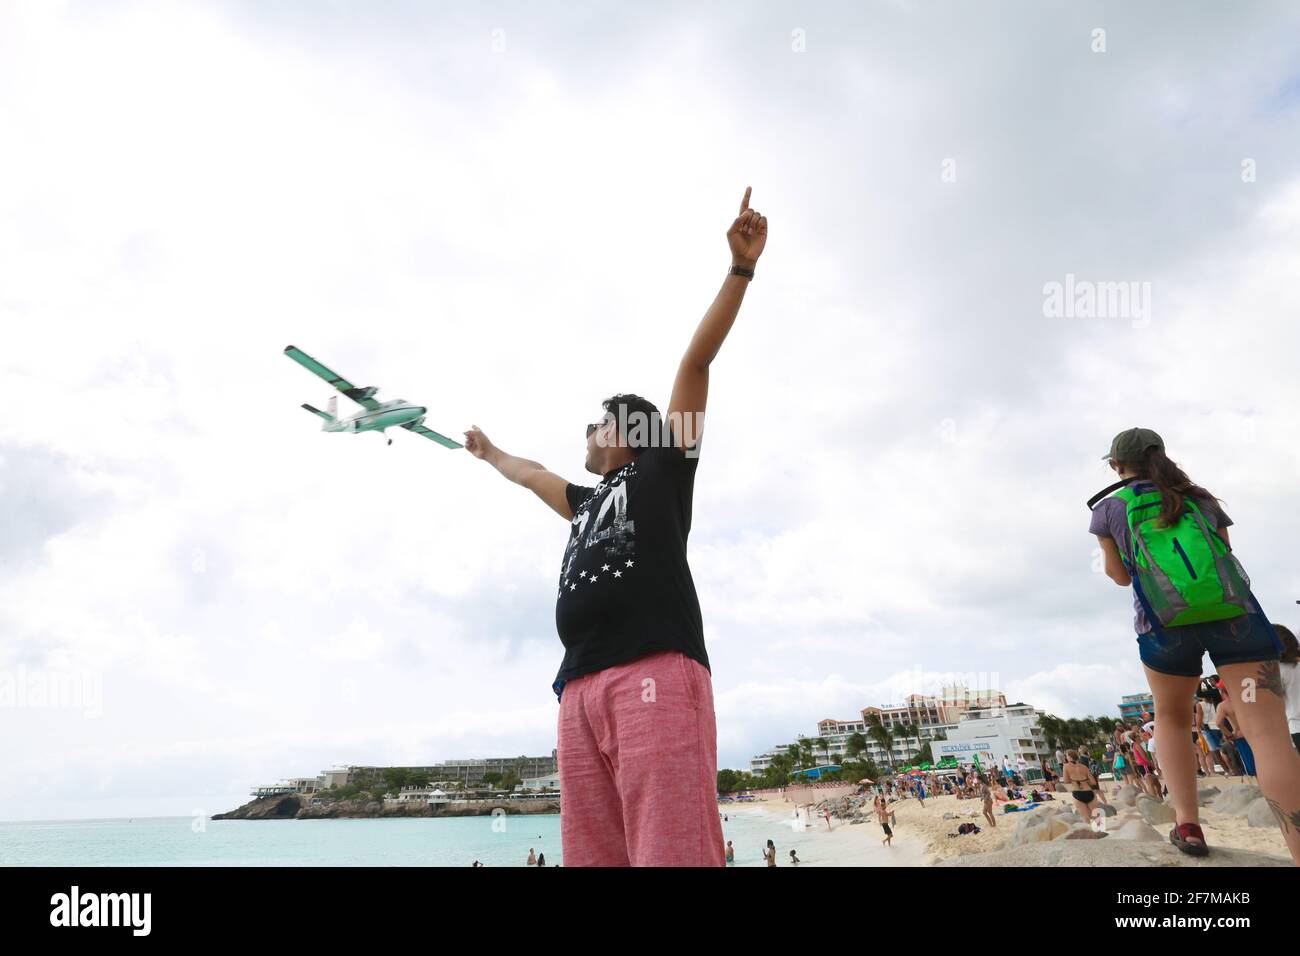 People on Maho beach are posing for pictures with airplanes that are landing on the adjacent airport. Stock Photo